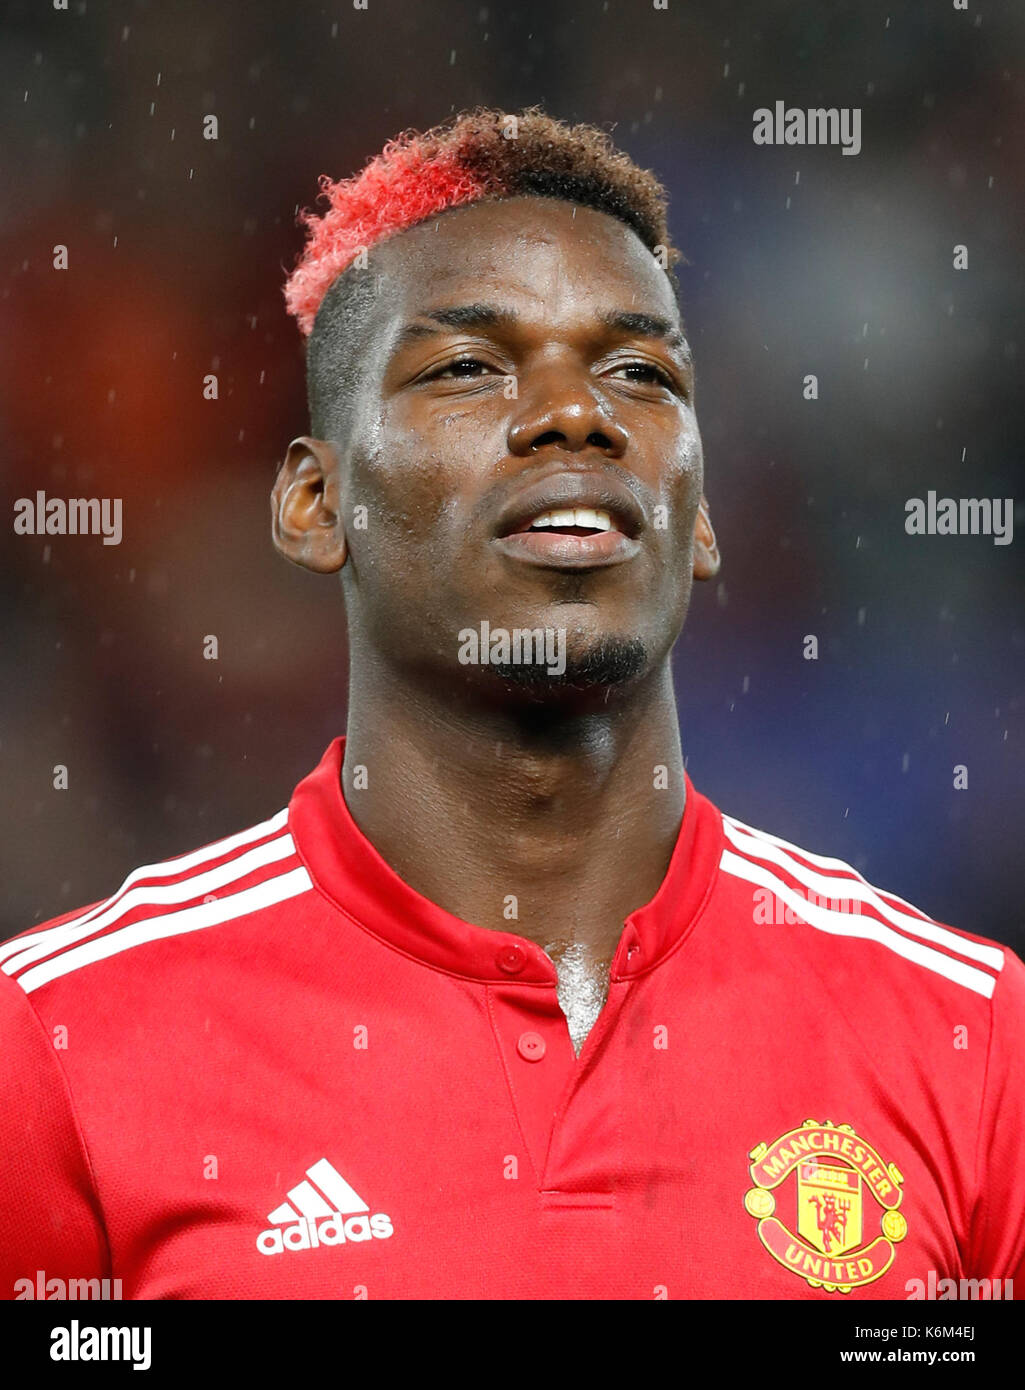 Manchester United's Paul Pogba during the UEFA Champions League, Group A  match at Old Trafford, Manchester. PRESS ASSOCIATION Photo. Picture date:  Tuesday September 12, 2017. See PA story soccer Man Utd. Photo